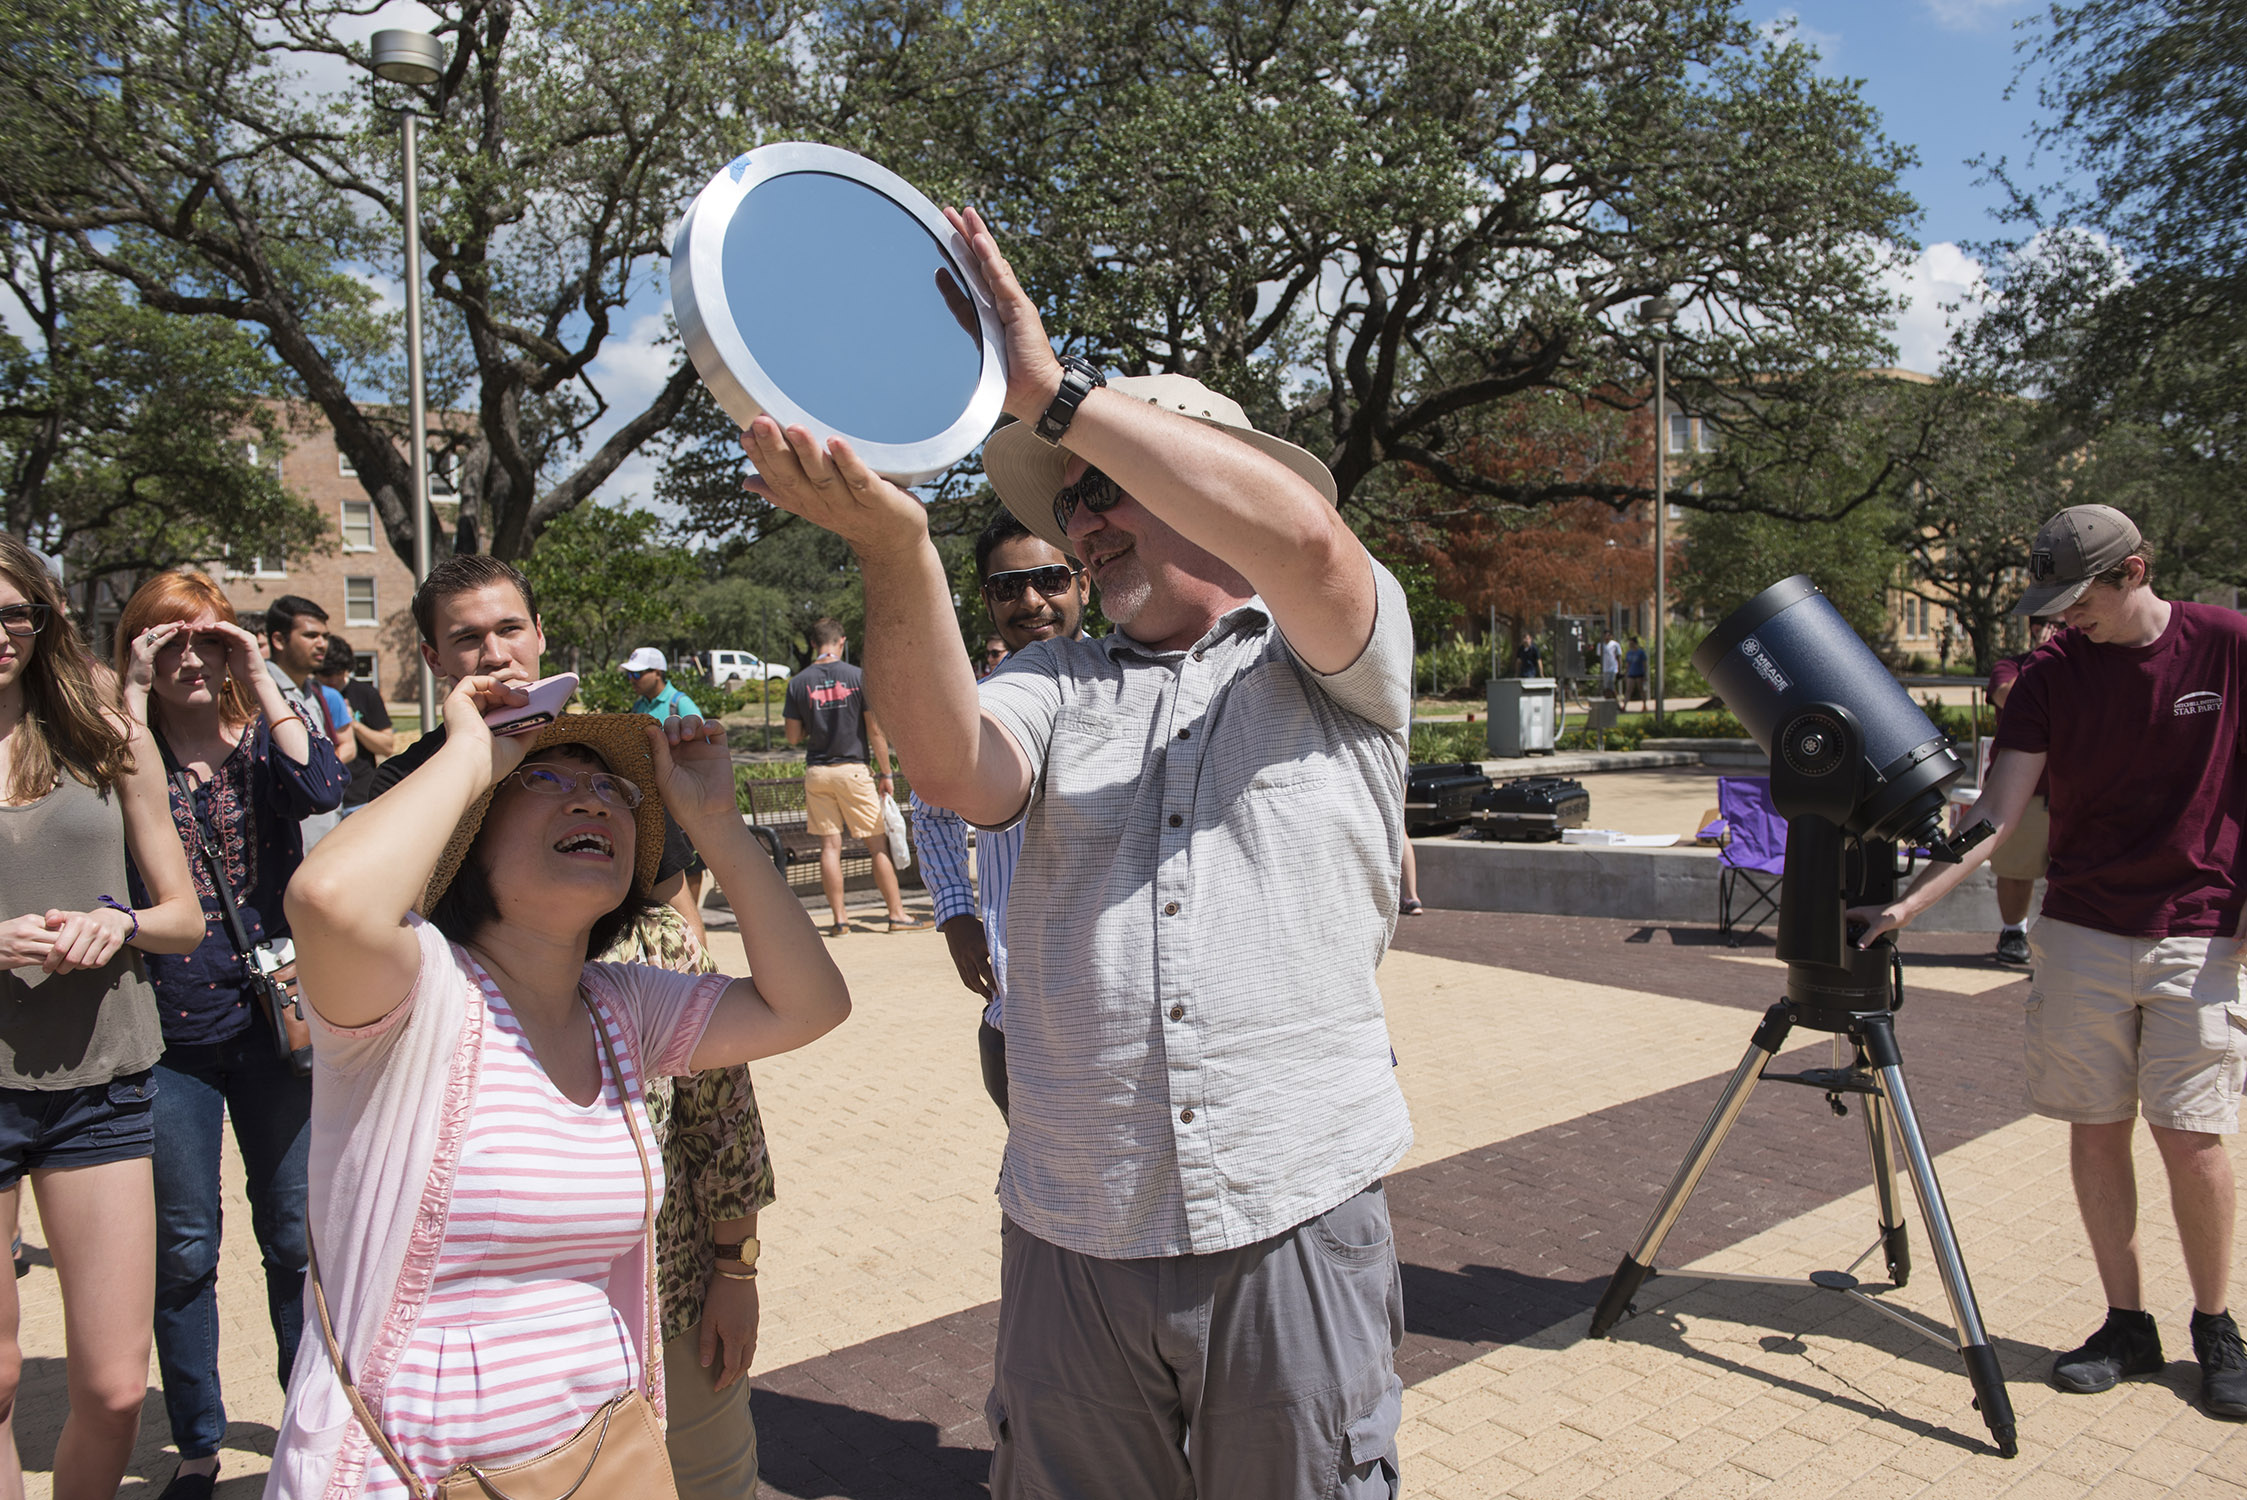 Texas A&amp;M University astronomer Darren DePoy assists a line of participants in viewing the solar eclipse from Rudder Plaza on the Texas A&amp;M campus on August 21, 2017